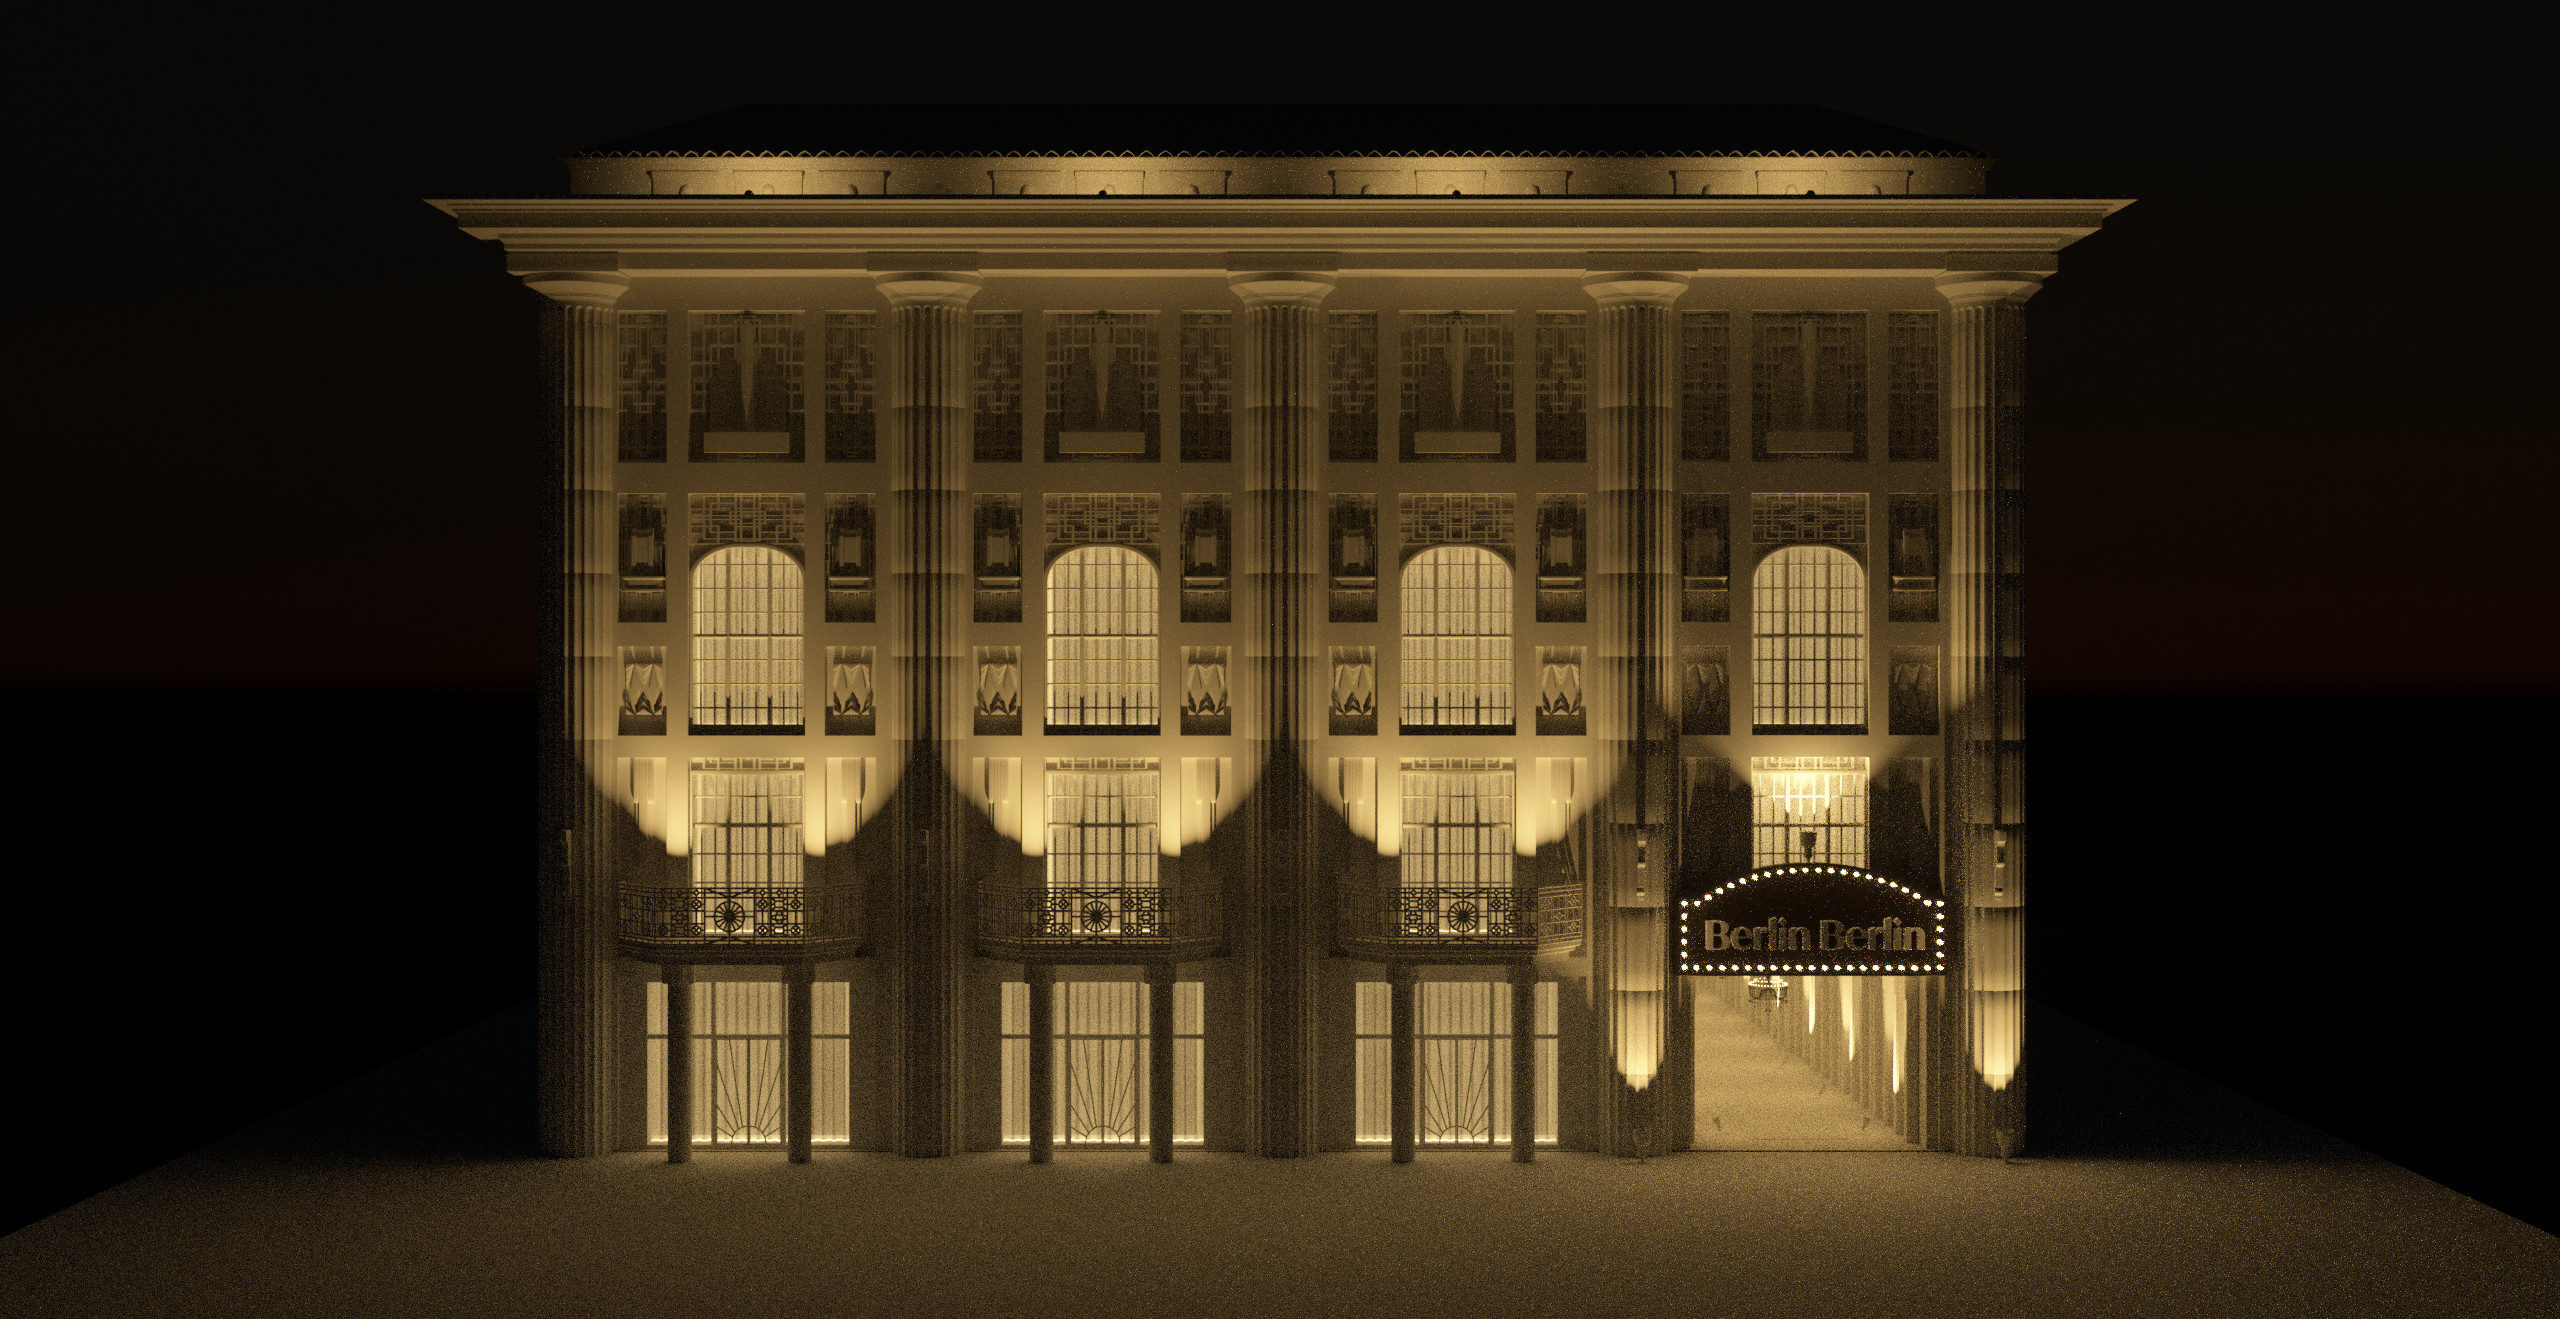 Stages of the Admiralspalast I build in 3D for the project.